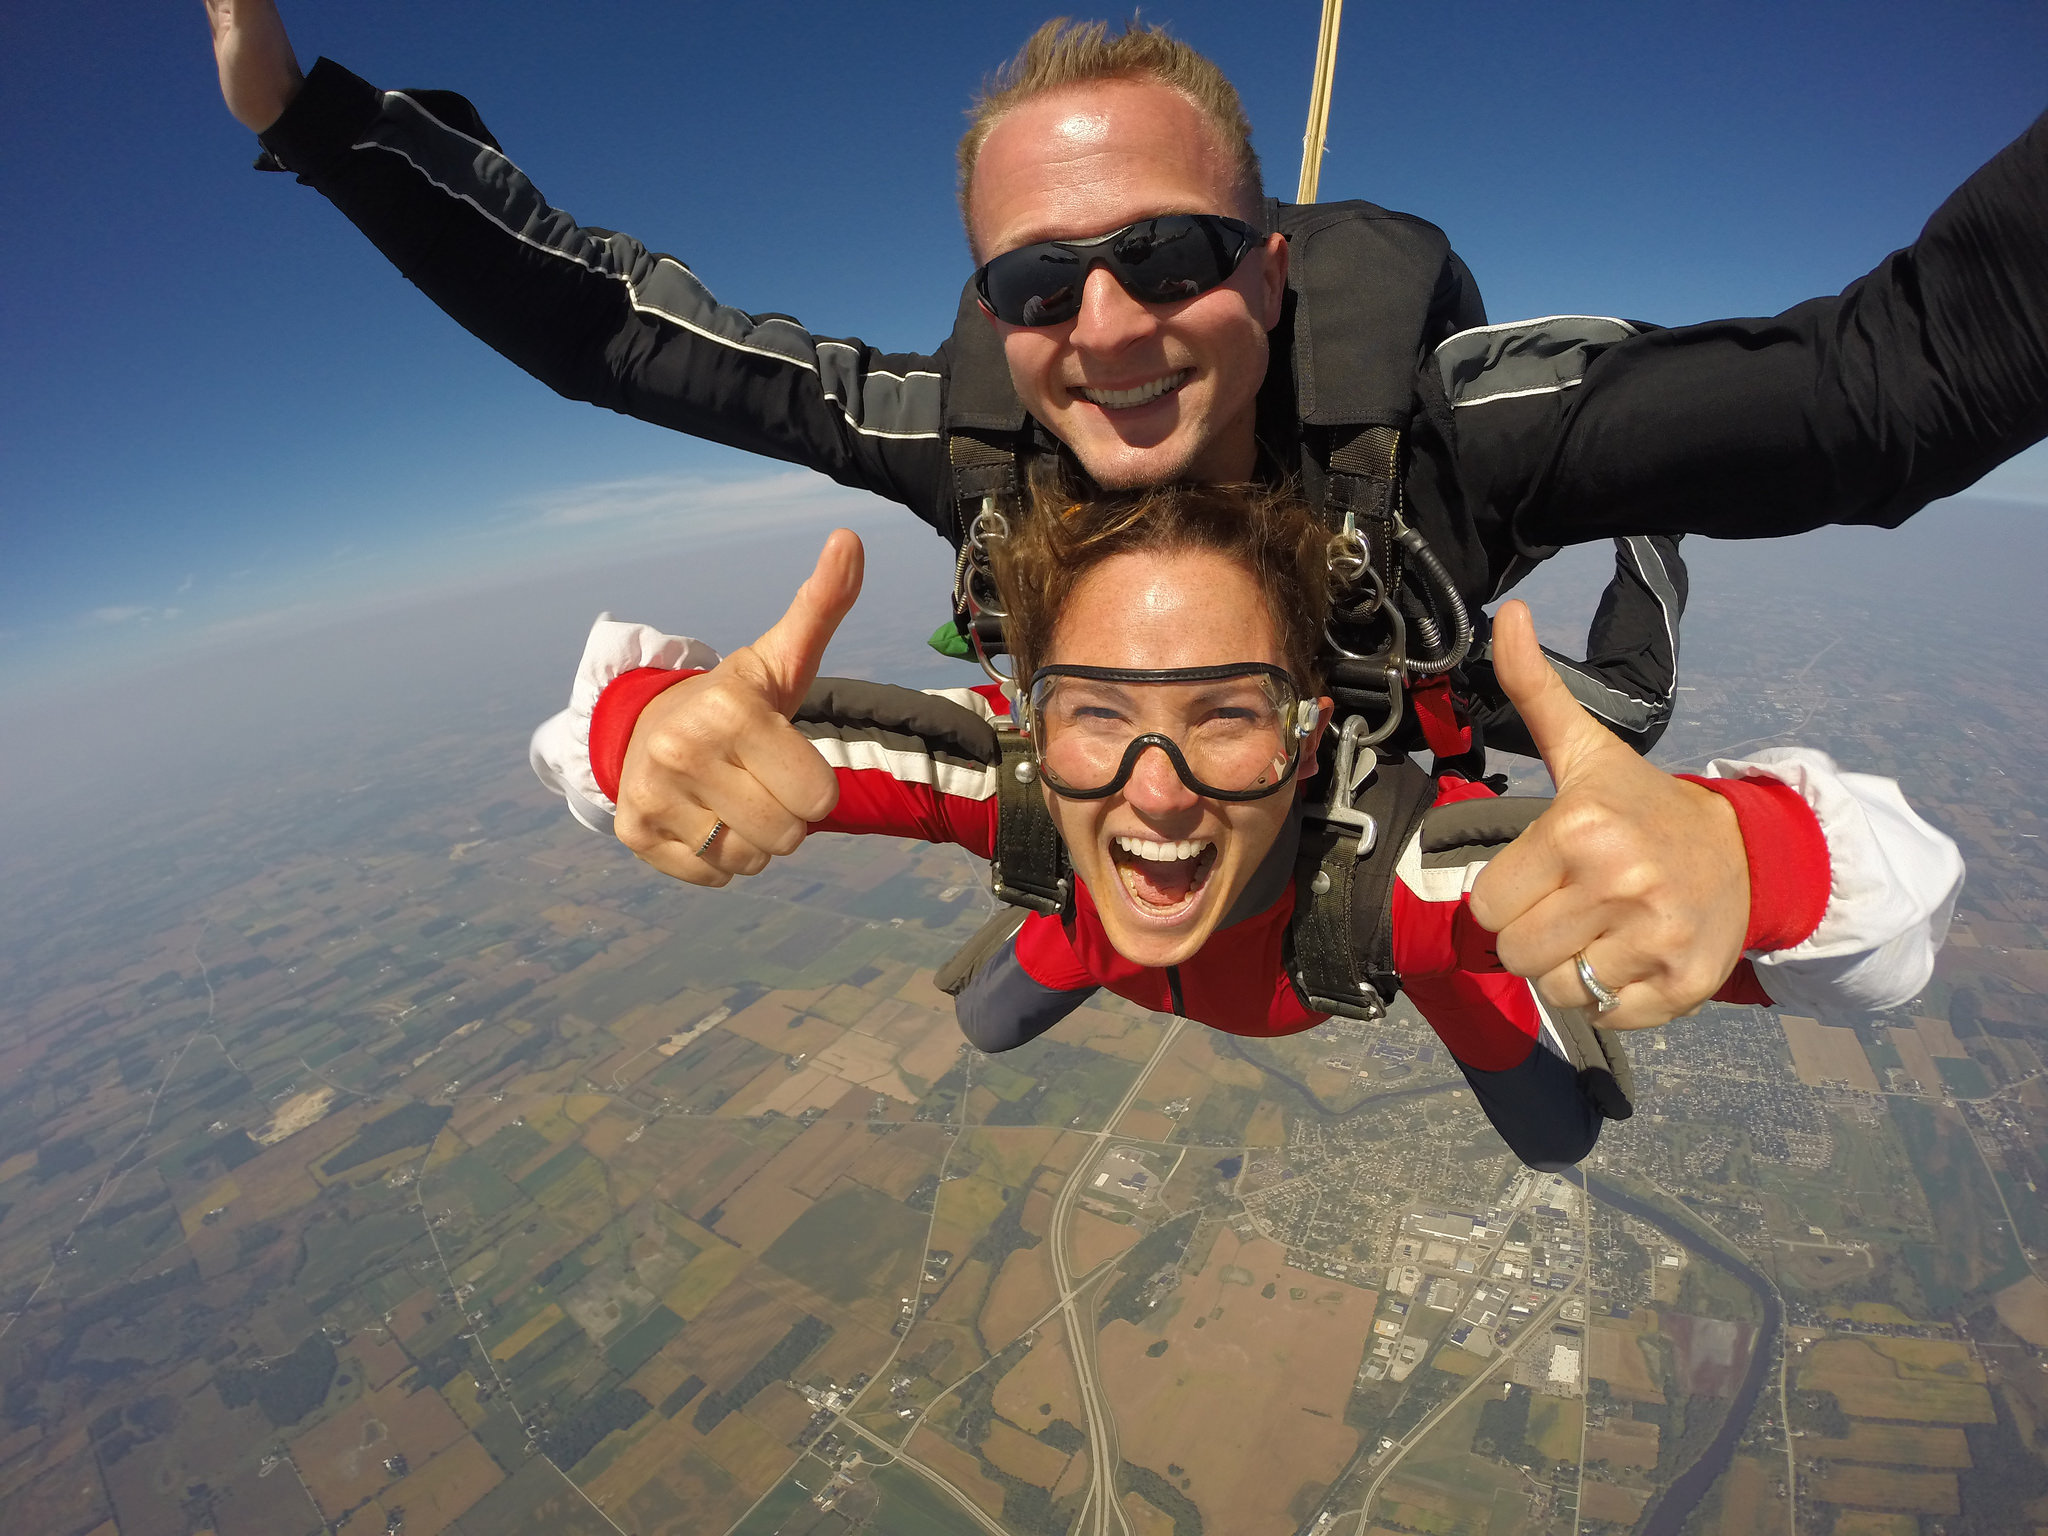 Girl giving two thumbs up while finishing a skydive at Wisconsin